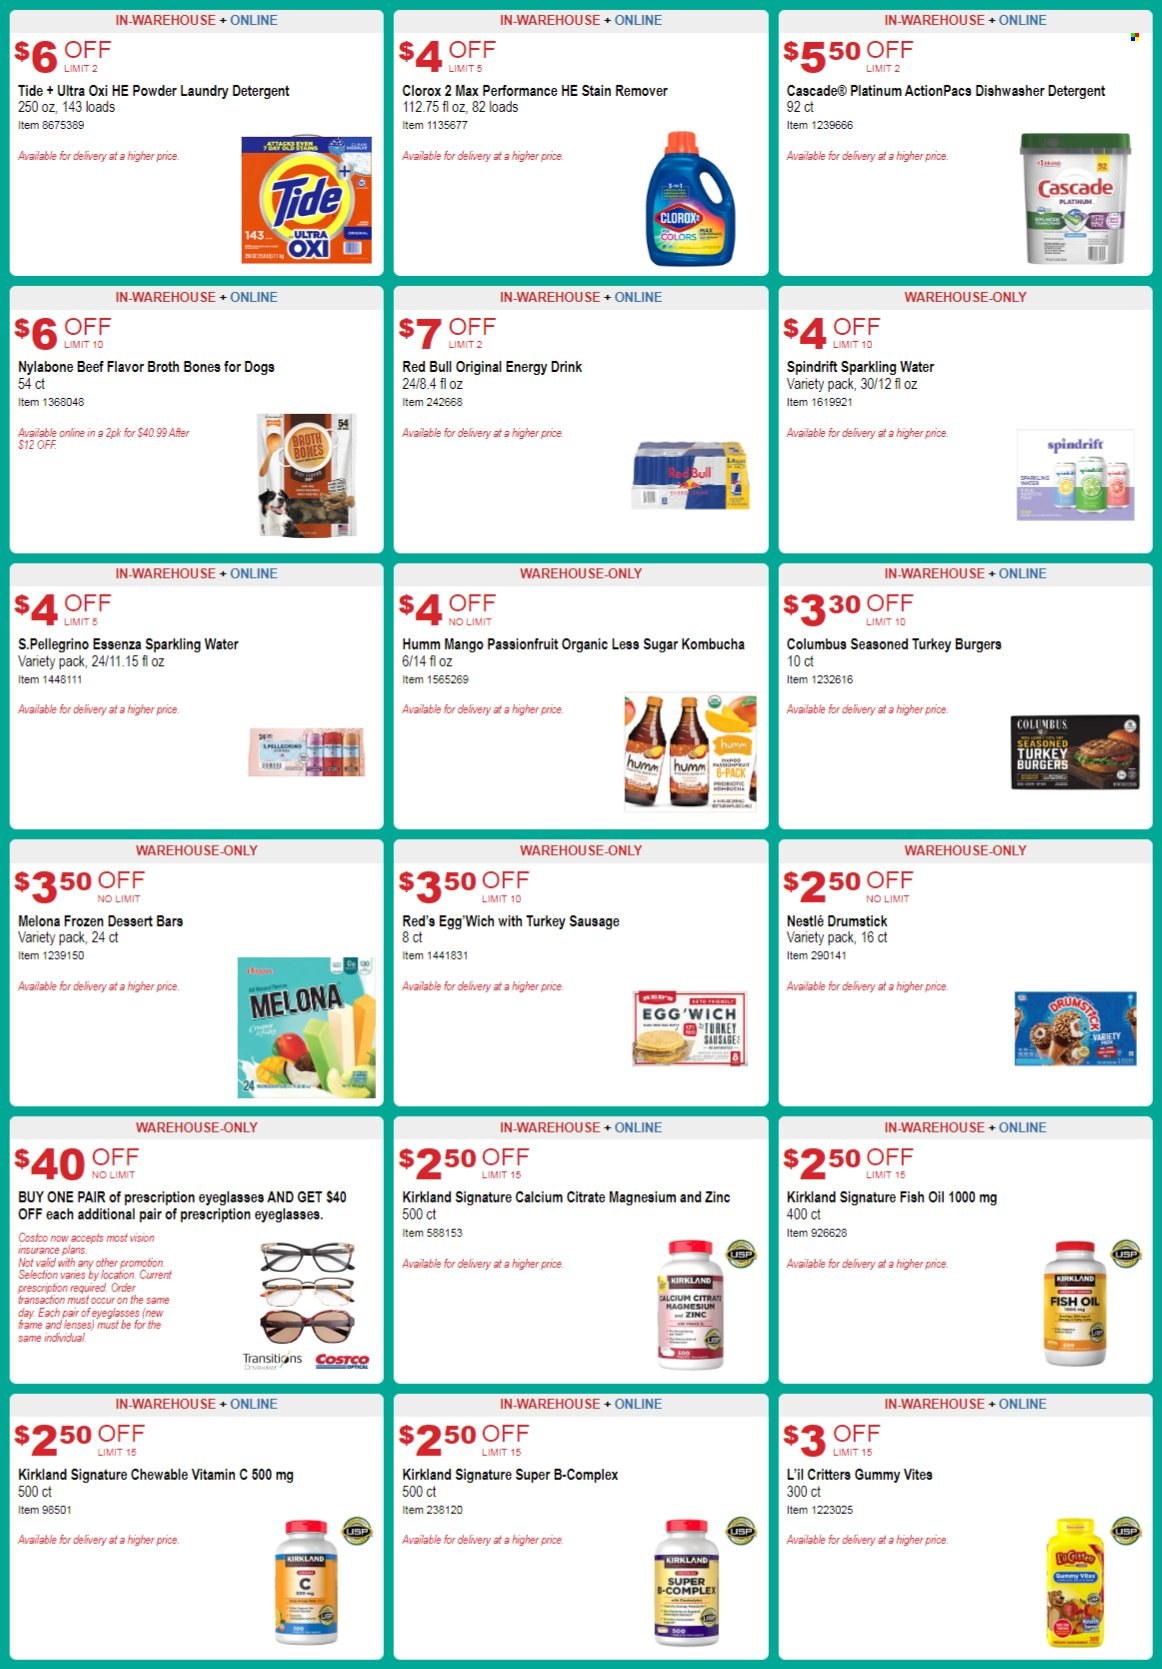 thumbnail - Costco Flyer - 05/18/2022 - 06/12/2022 - Sales products - hamburger, sausage, eggs, Nestlé, oil, energy drink, Red Bull, Spindrift, sparkling water, San Pellegrino, kombucha, turkey burger, detergent, stain remover, Clorox, Cascade, Tide, laundry detergent, Nylabone, lenses, eye glasses, calcium, fish oil, magnesium, vitamin c, zinc. Page 9.